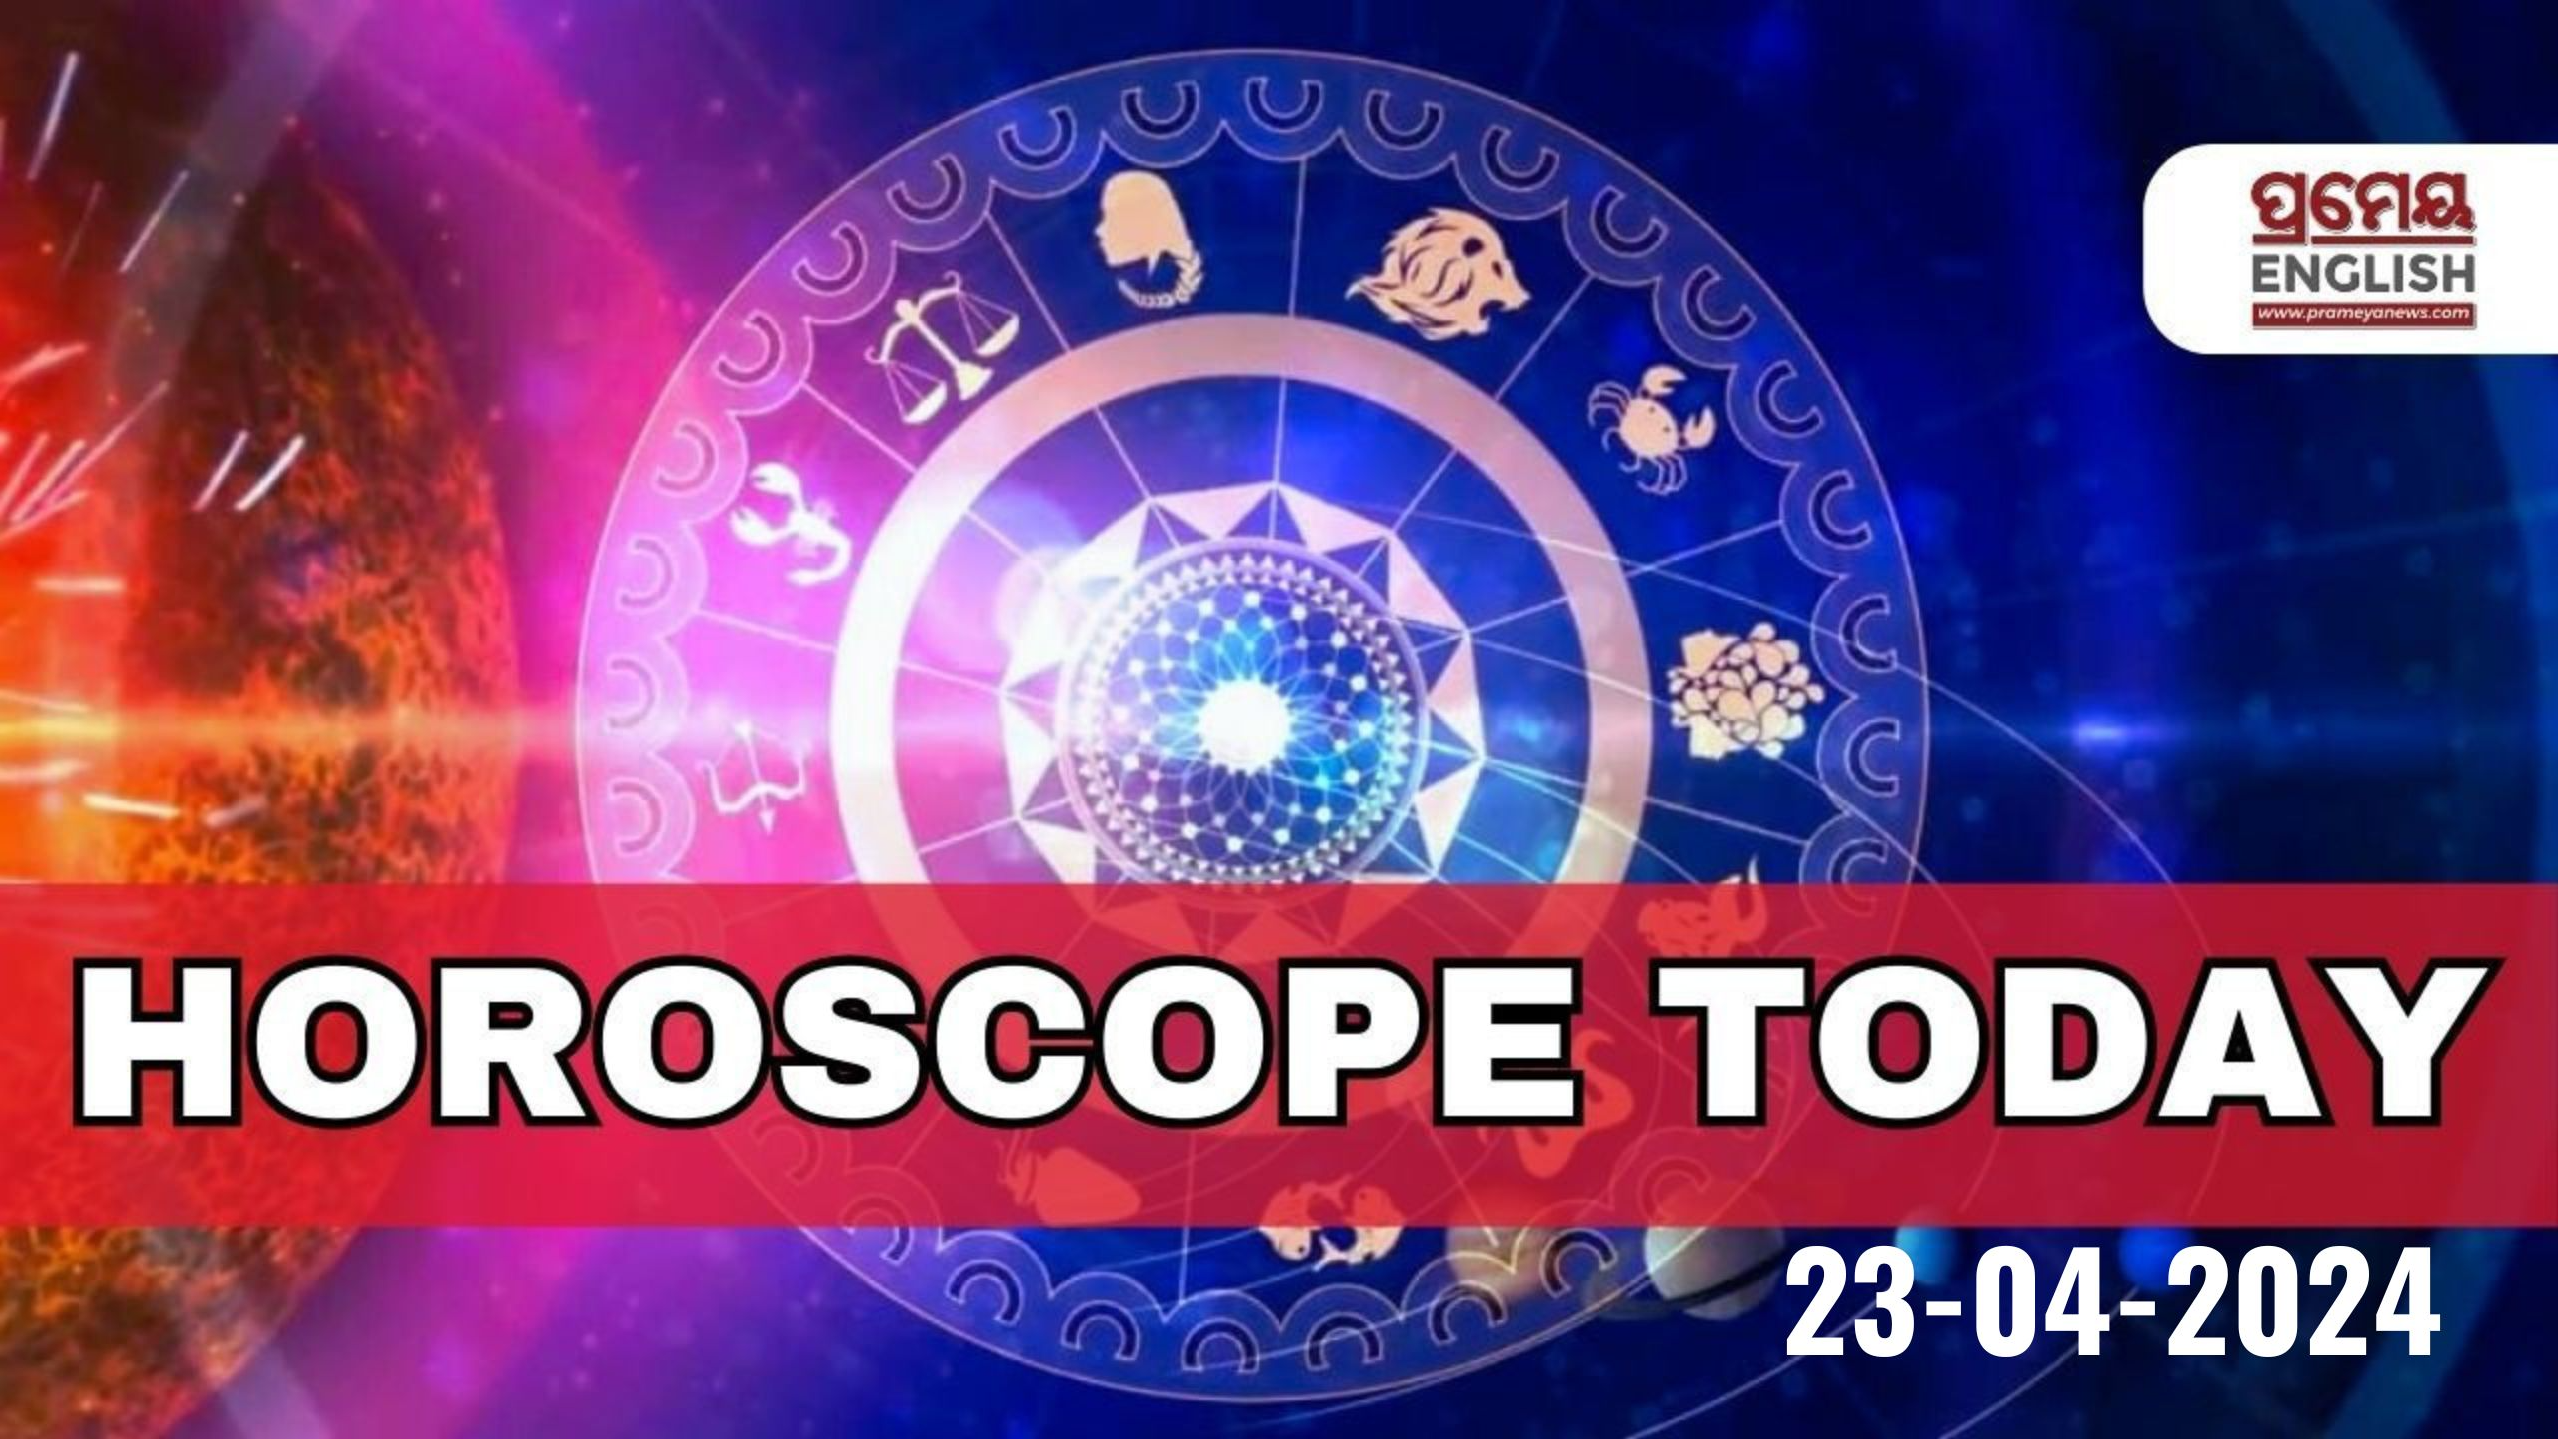 Horoscope Today: Astrological prediction for May 2, 2024